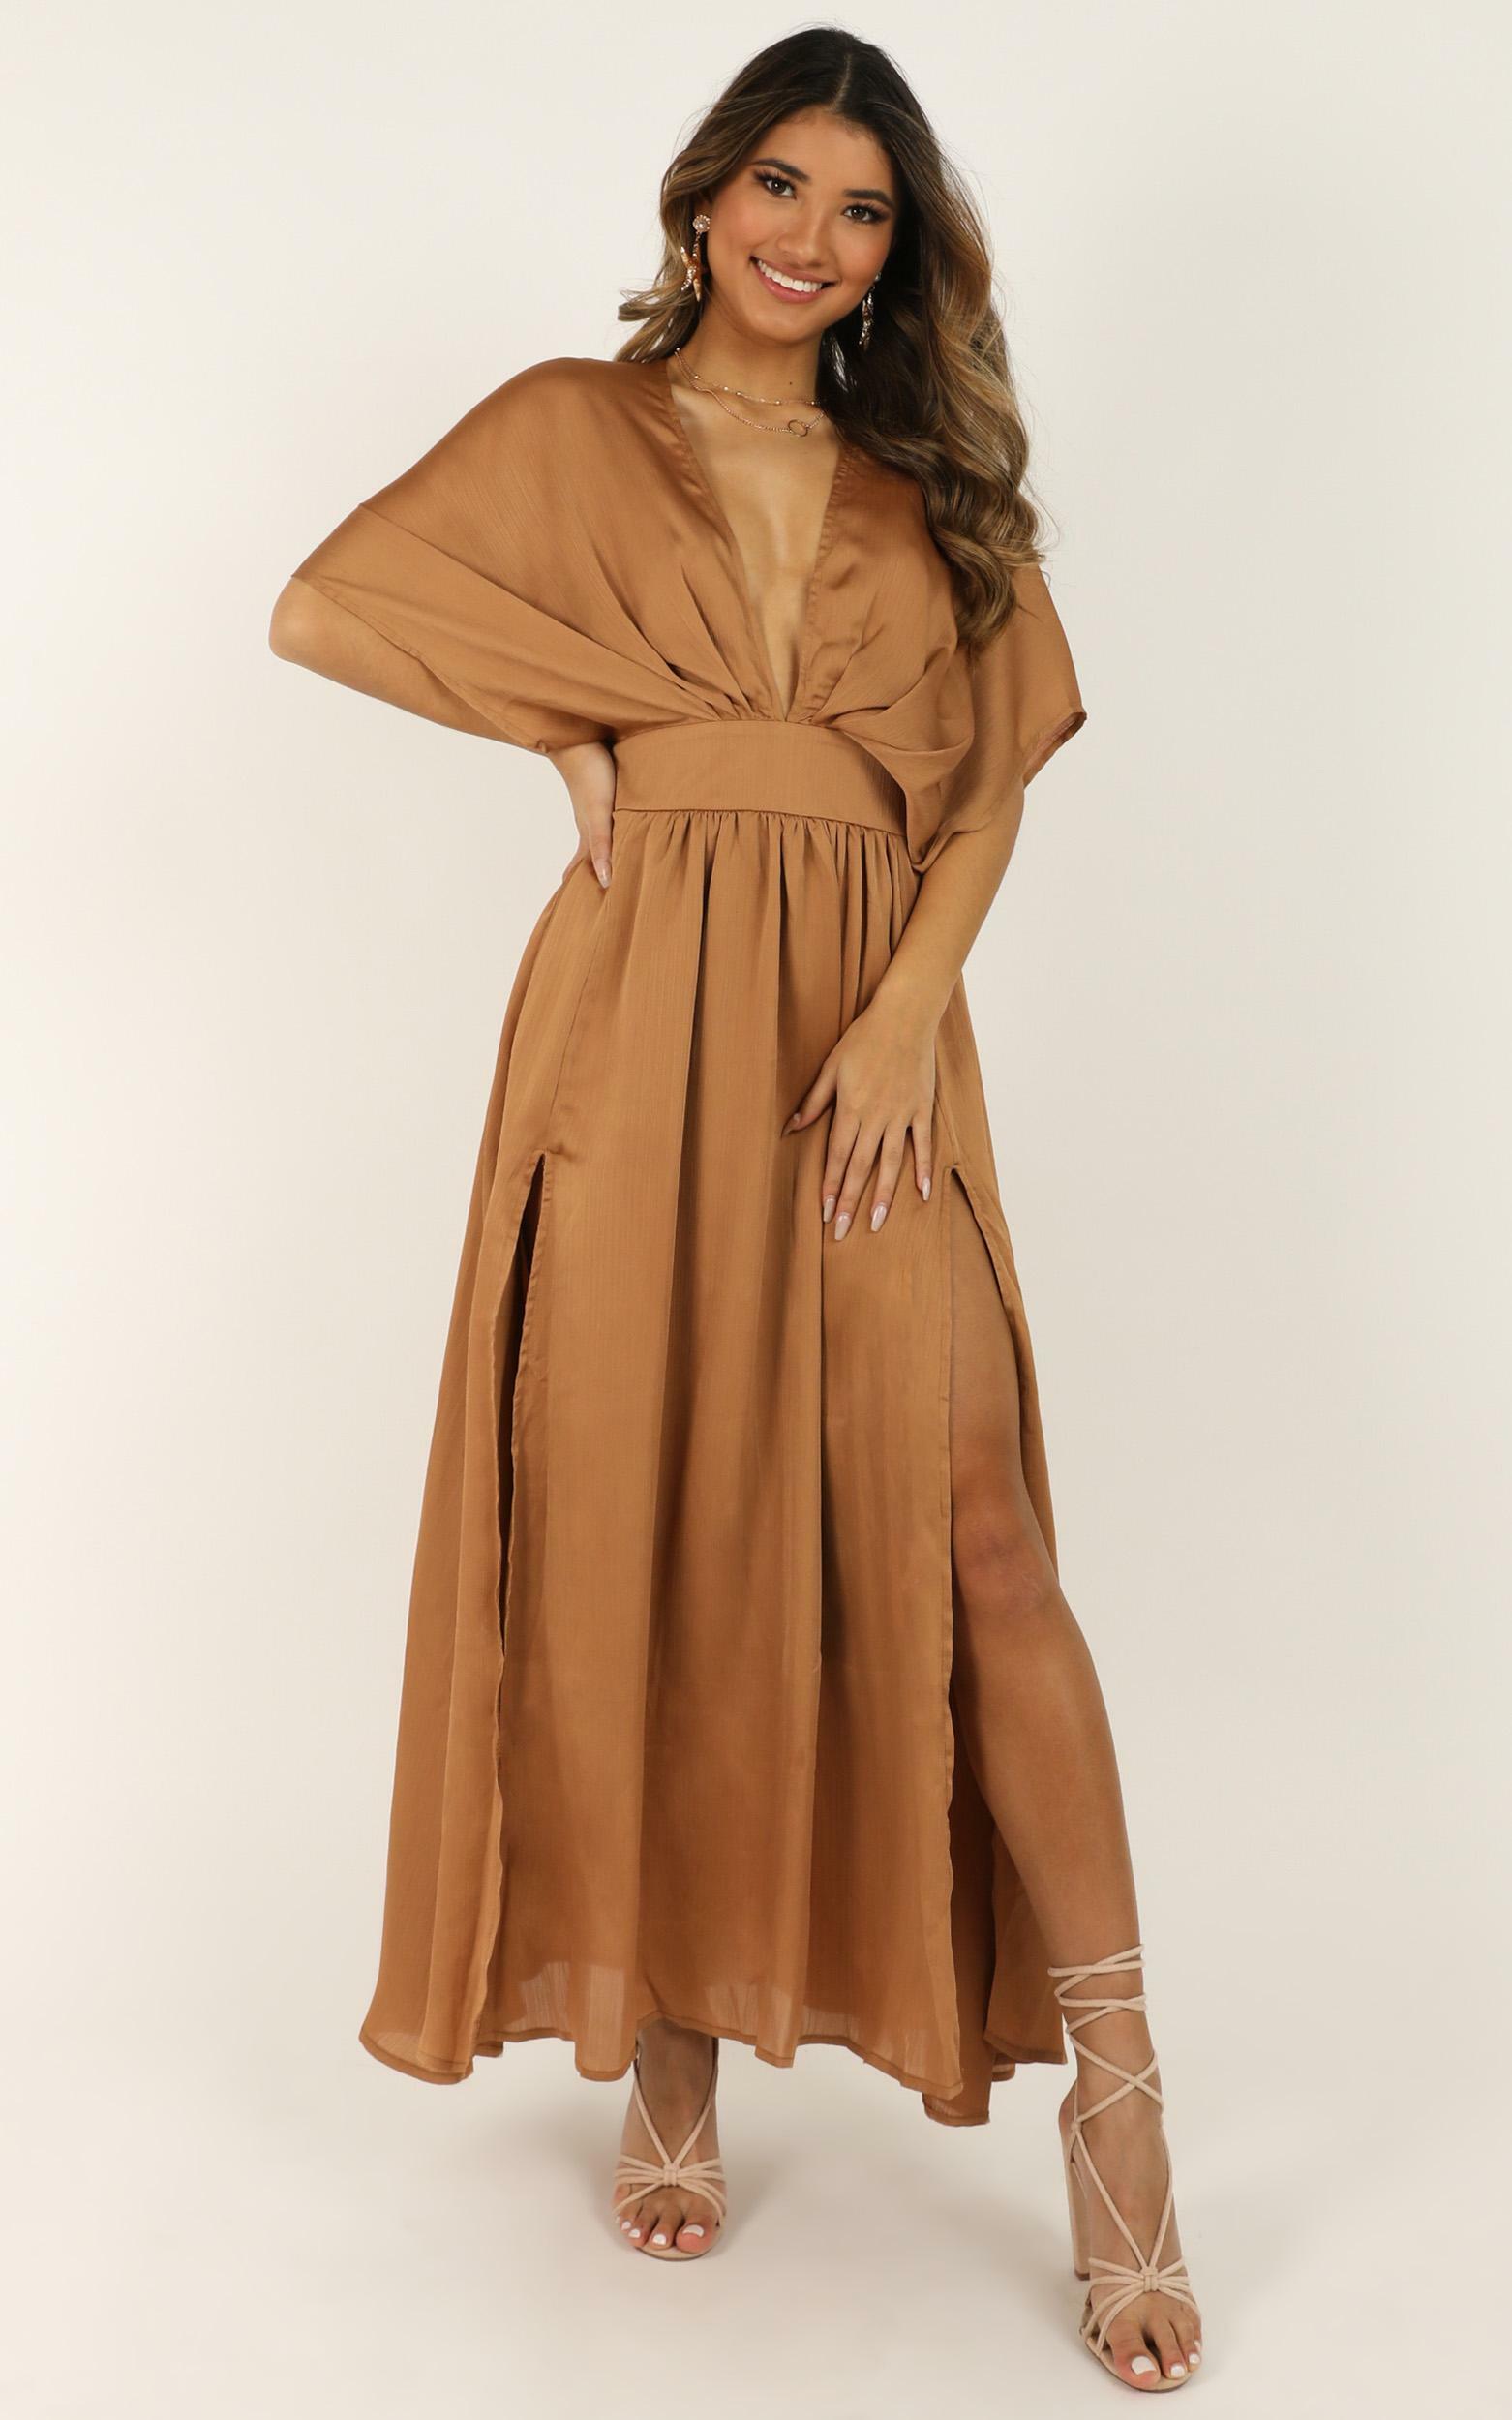 Save It For Later Dress in Camel Satin - 20, BRN3, hi-res image number null